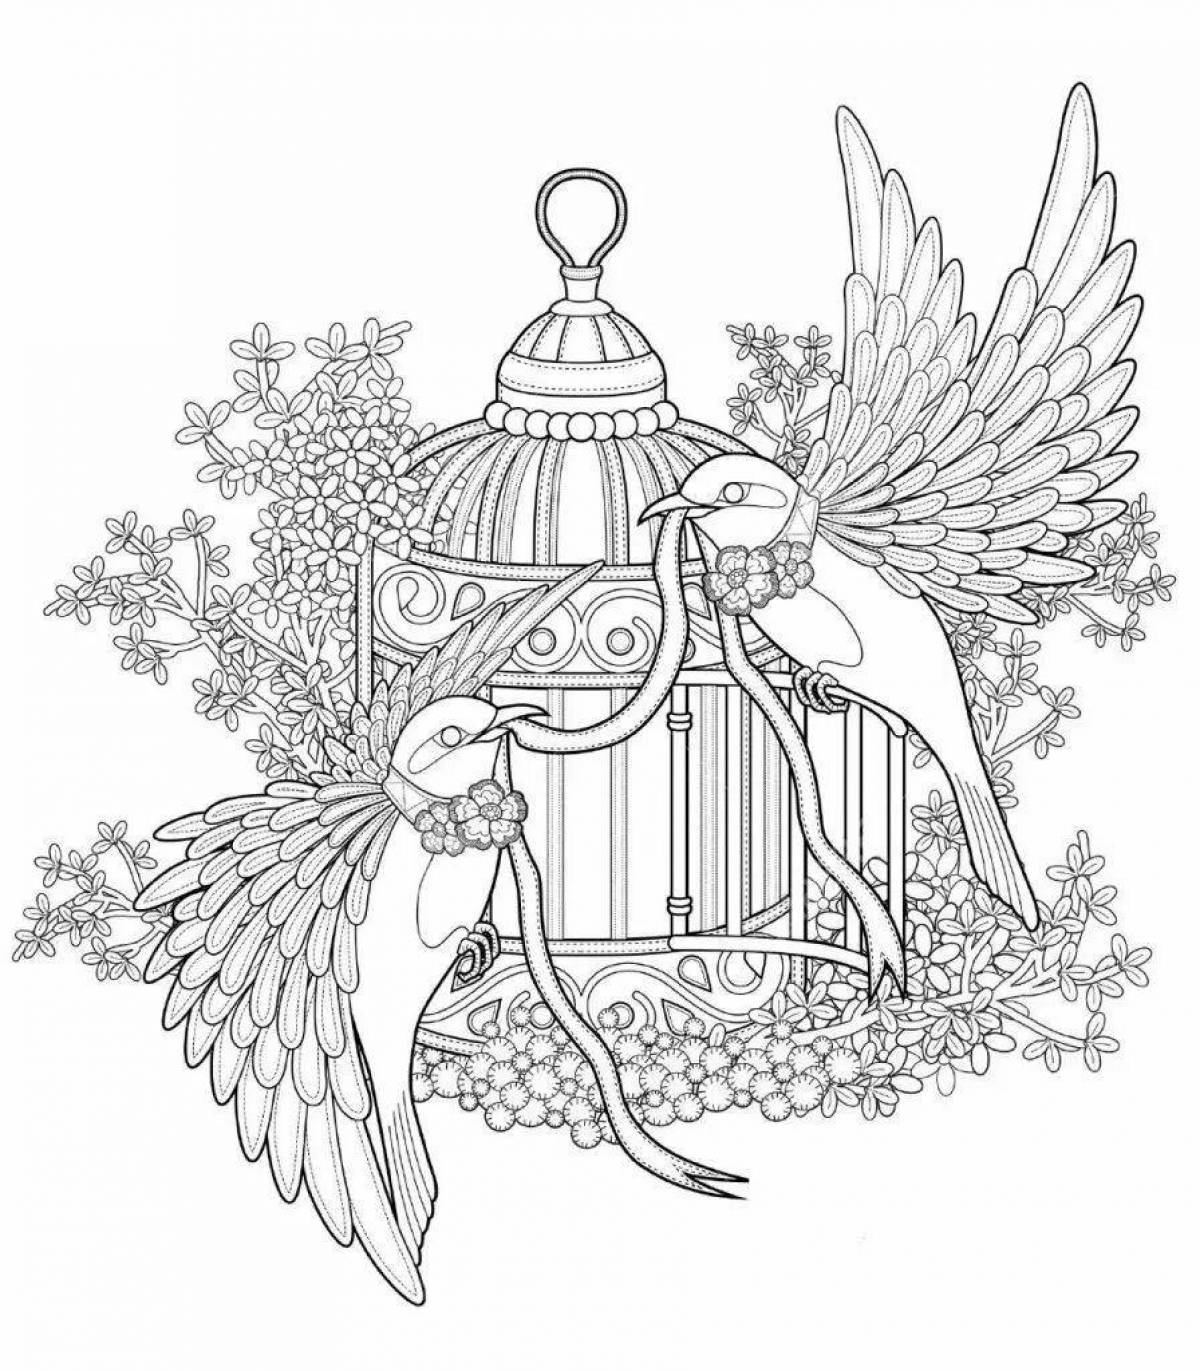 Amazing bird of paradise coloring pages